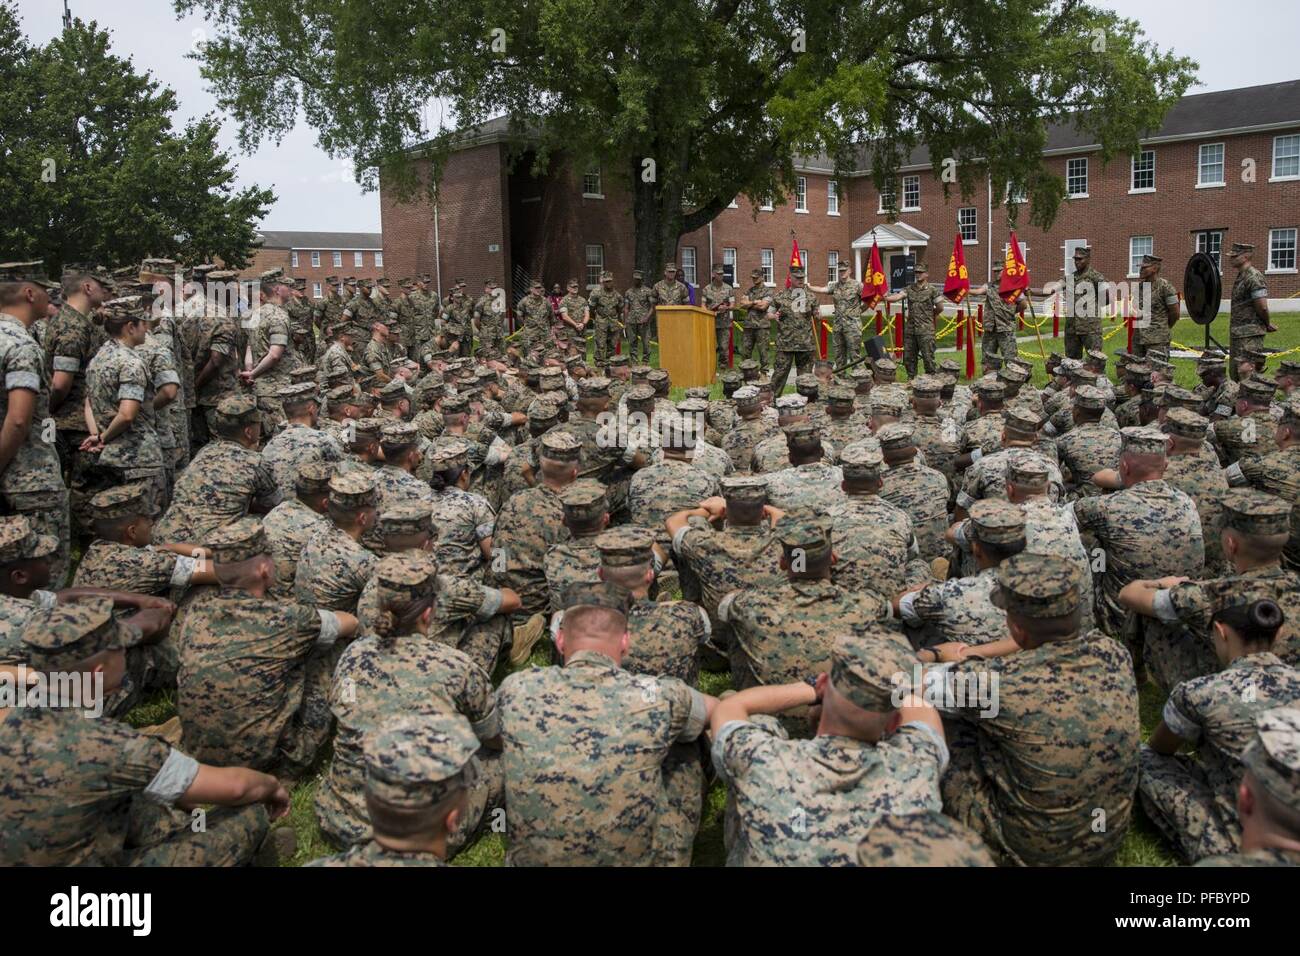 U.S. Marine Corps Brig. Gen. David W. Maxwell, 2nd Marine Logistics Group commanding general, speaks to Marines and Sailors with 2nd Transportation Support Battalion, Combat Logistics Regiment 2, 2nd MLG, during an award ceremony on Camp Lejeune, N.C., June 5, 2018. The ceremony was held to recognize 2nd TSB as the Marine Corps Motor Transport Unit of the Year. Stock Photo